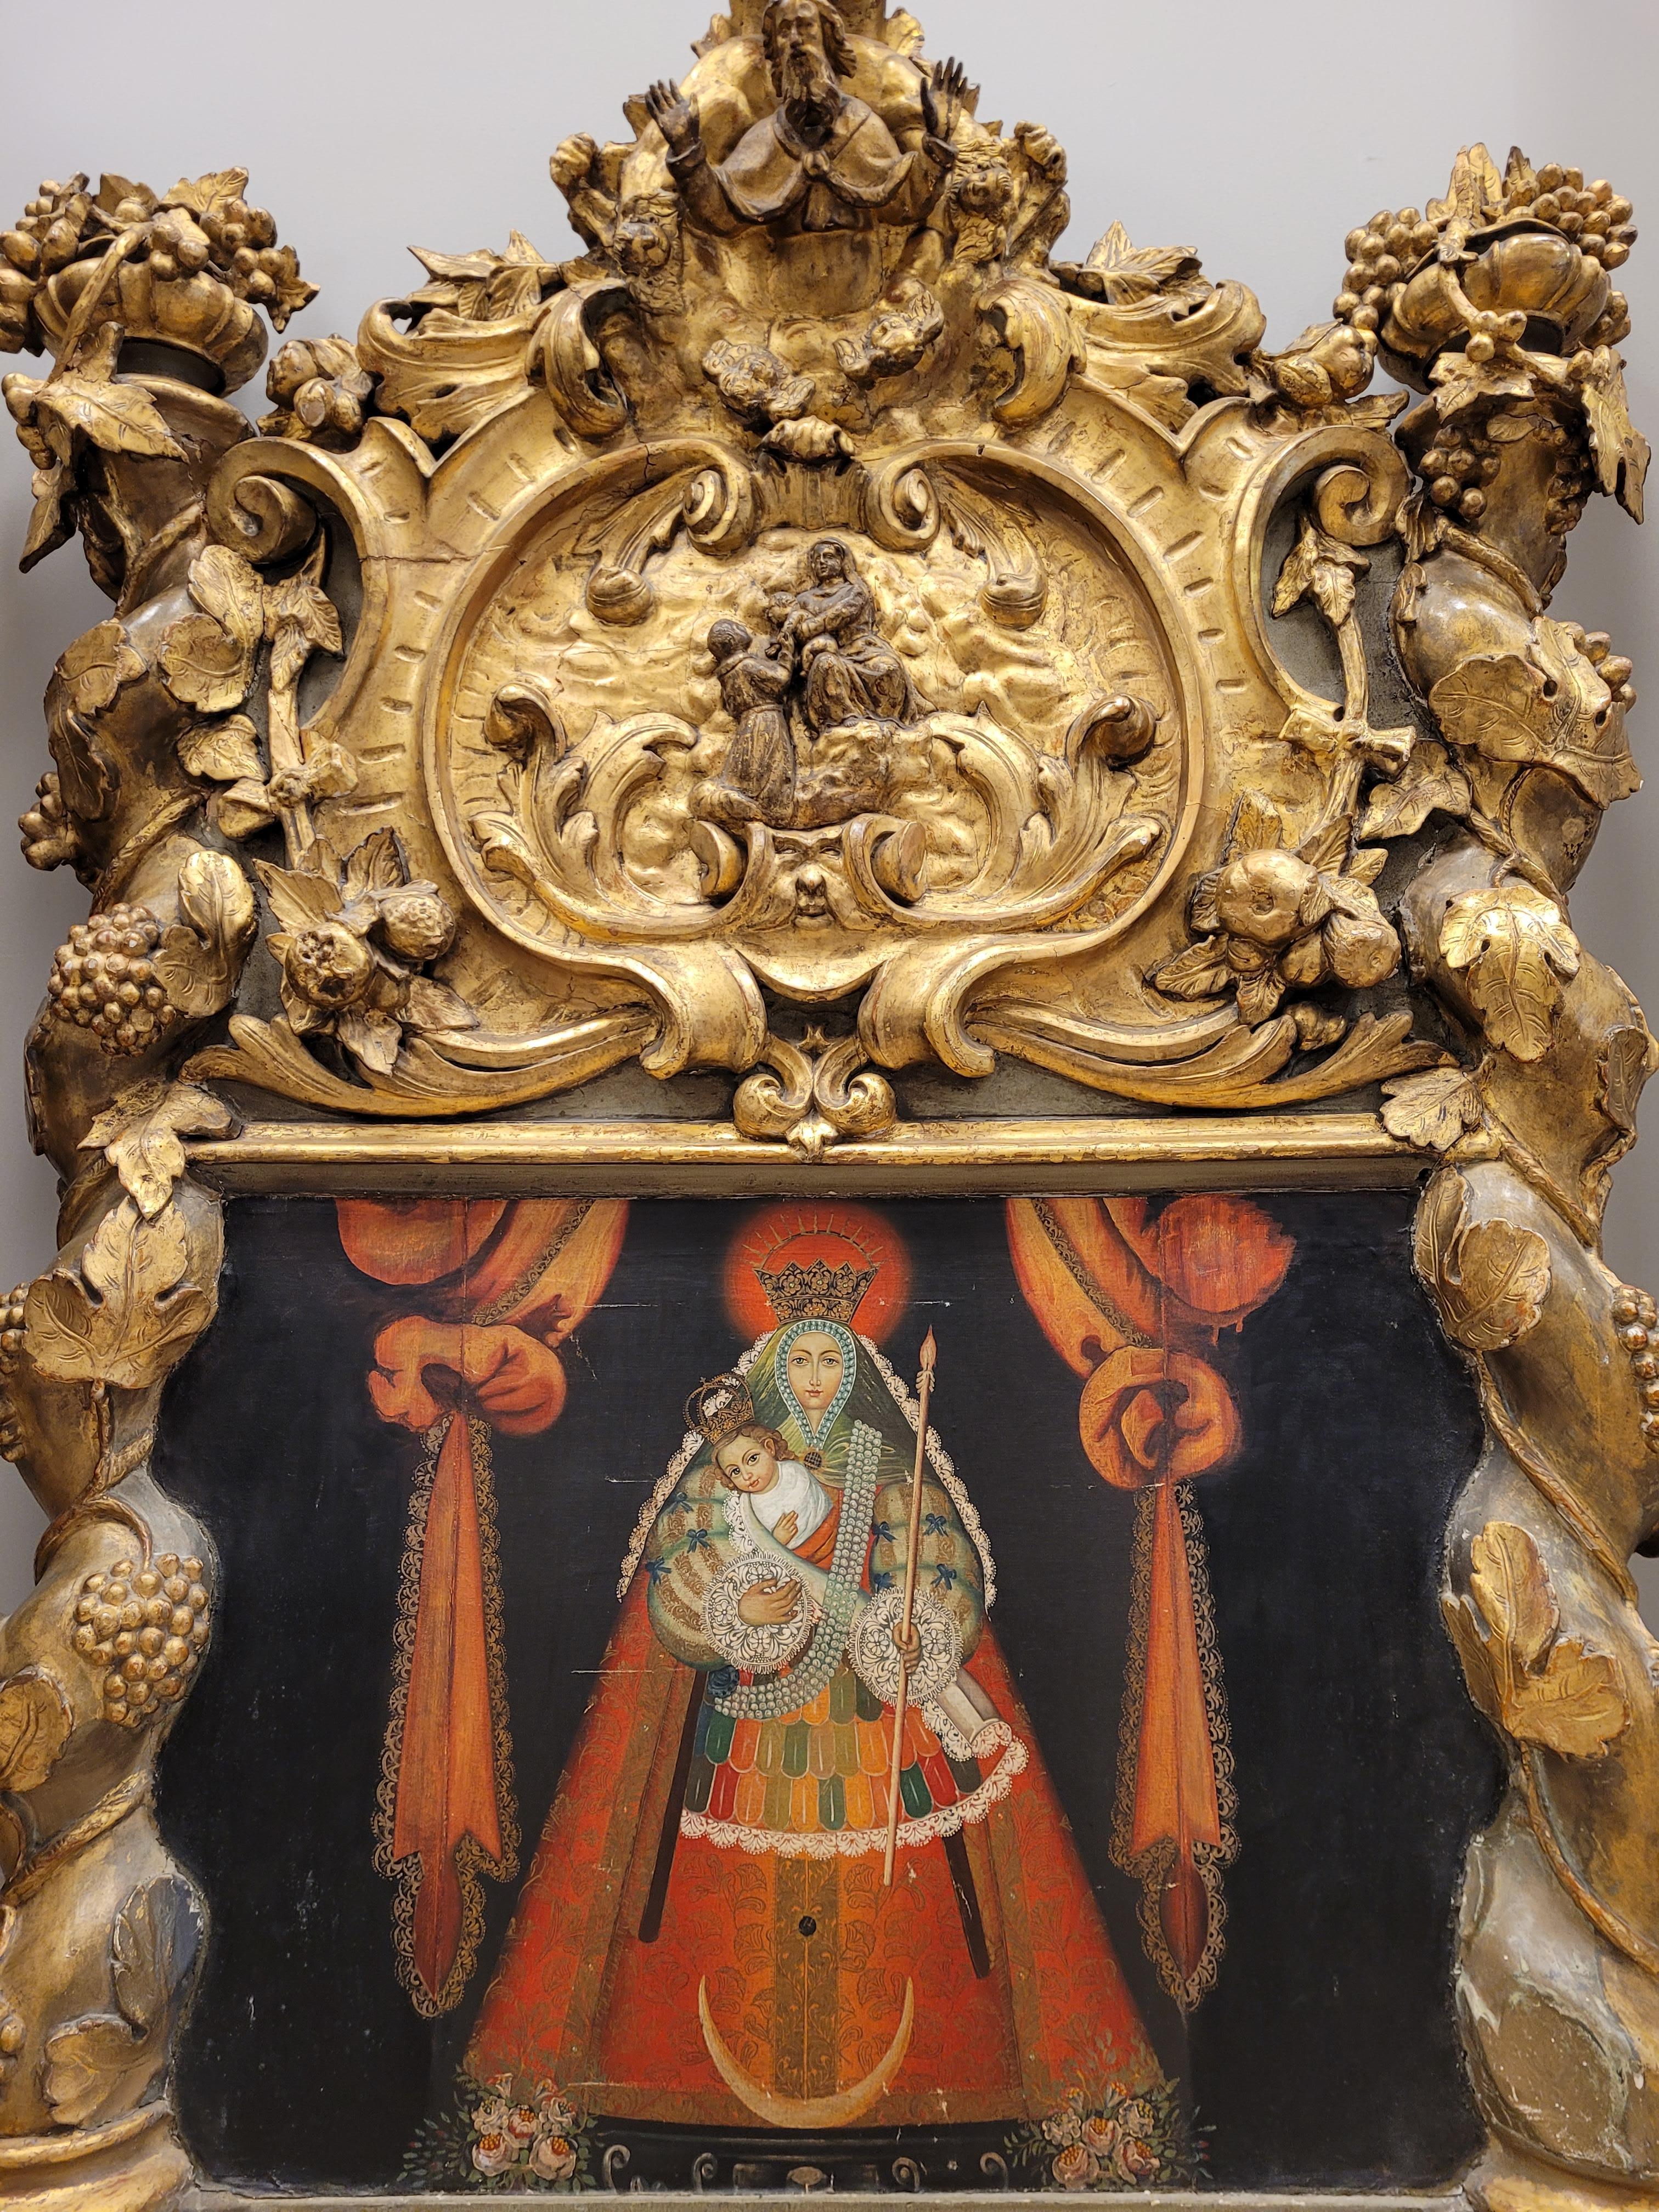 One of a Kind Colonial Baroque altarpiece where the Virgin of Candelaria is represented, made in the 18th century in Cuzco (Peru). This magnificent piece has two different parts of extraordinary quality. The first is a painting where Marian